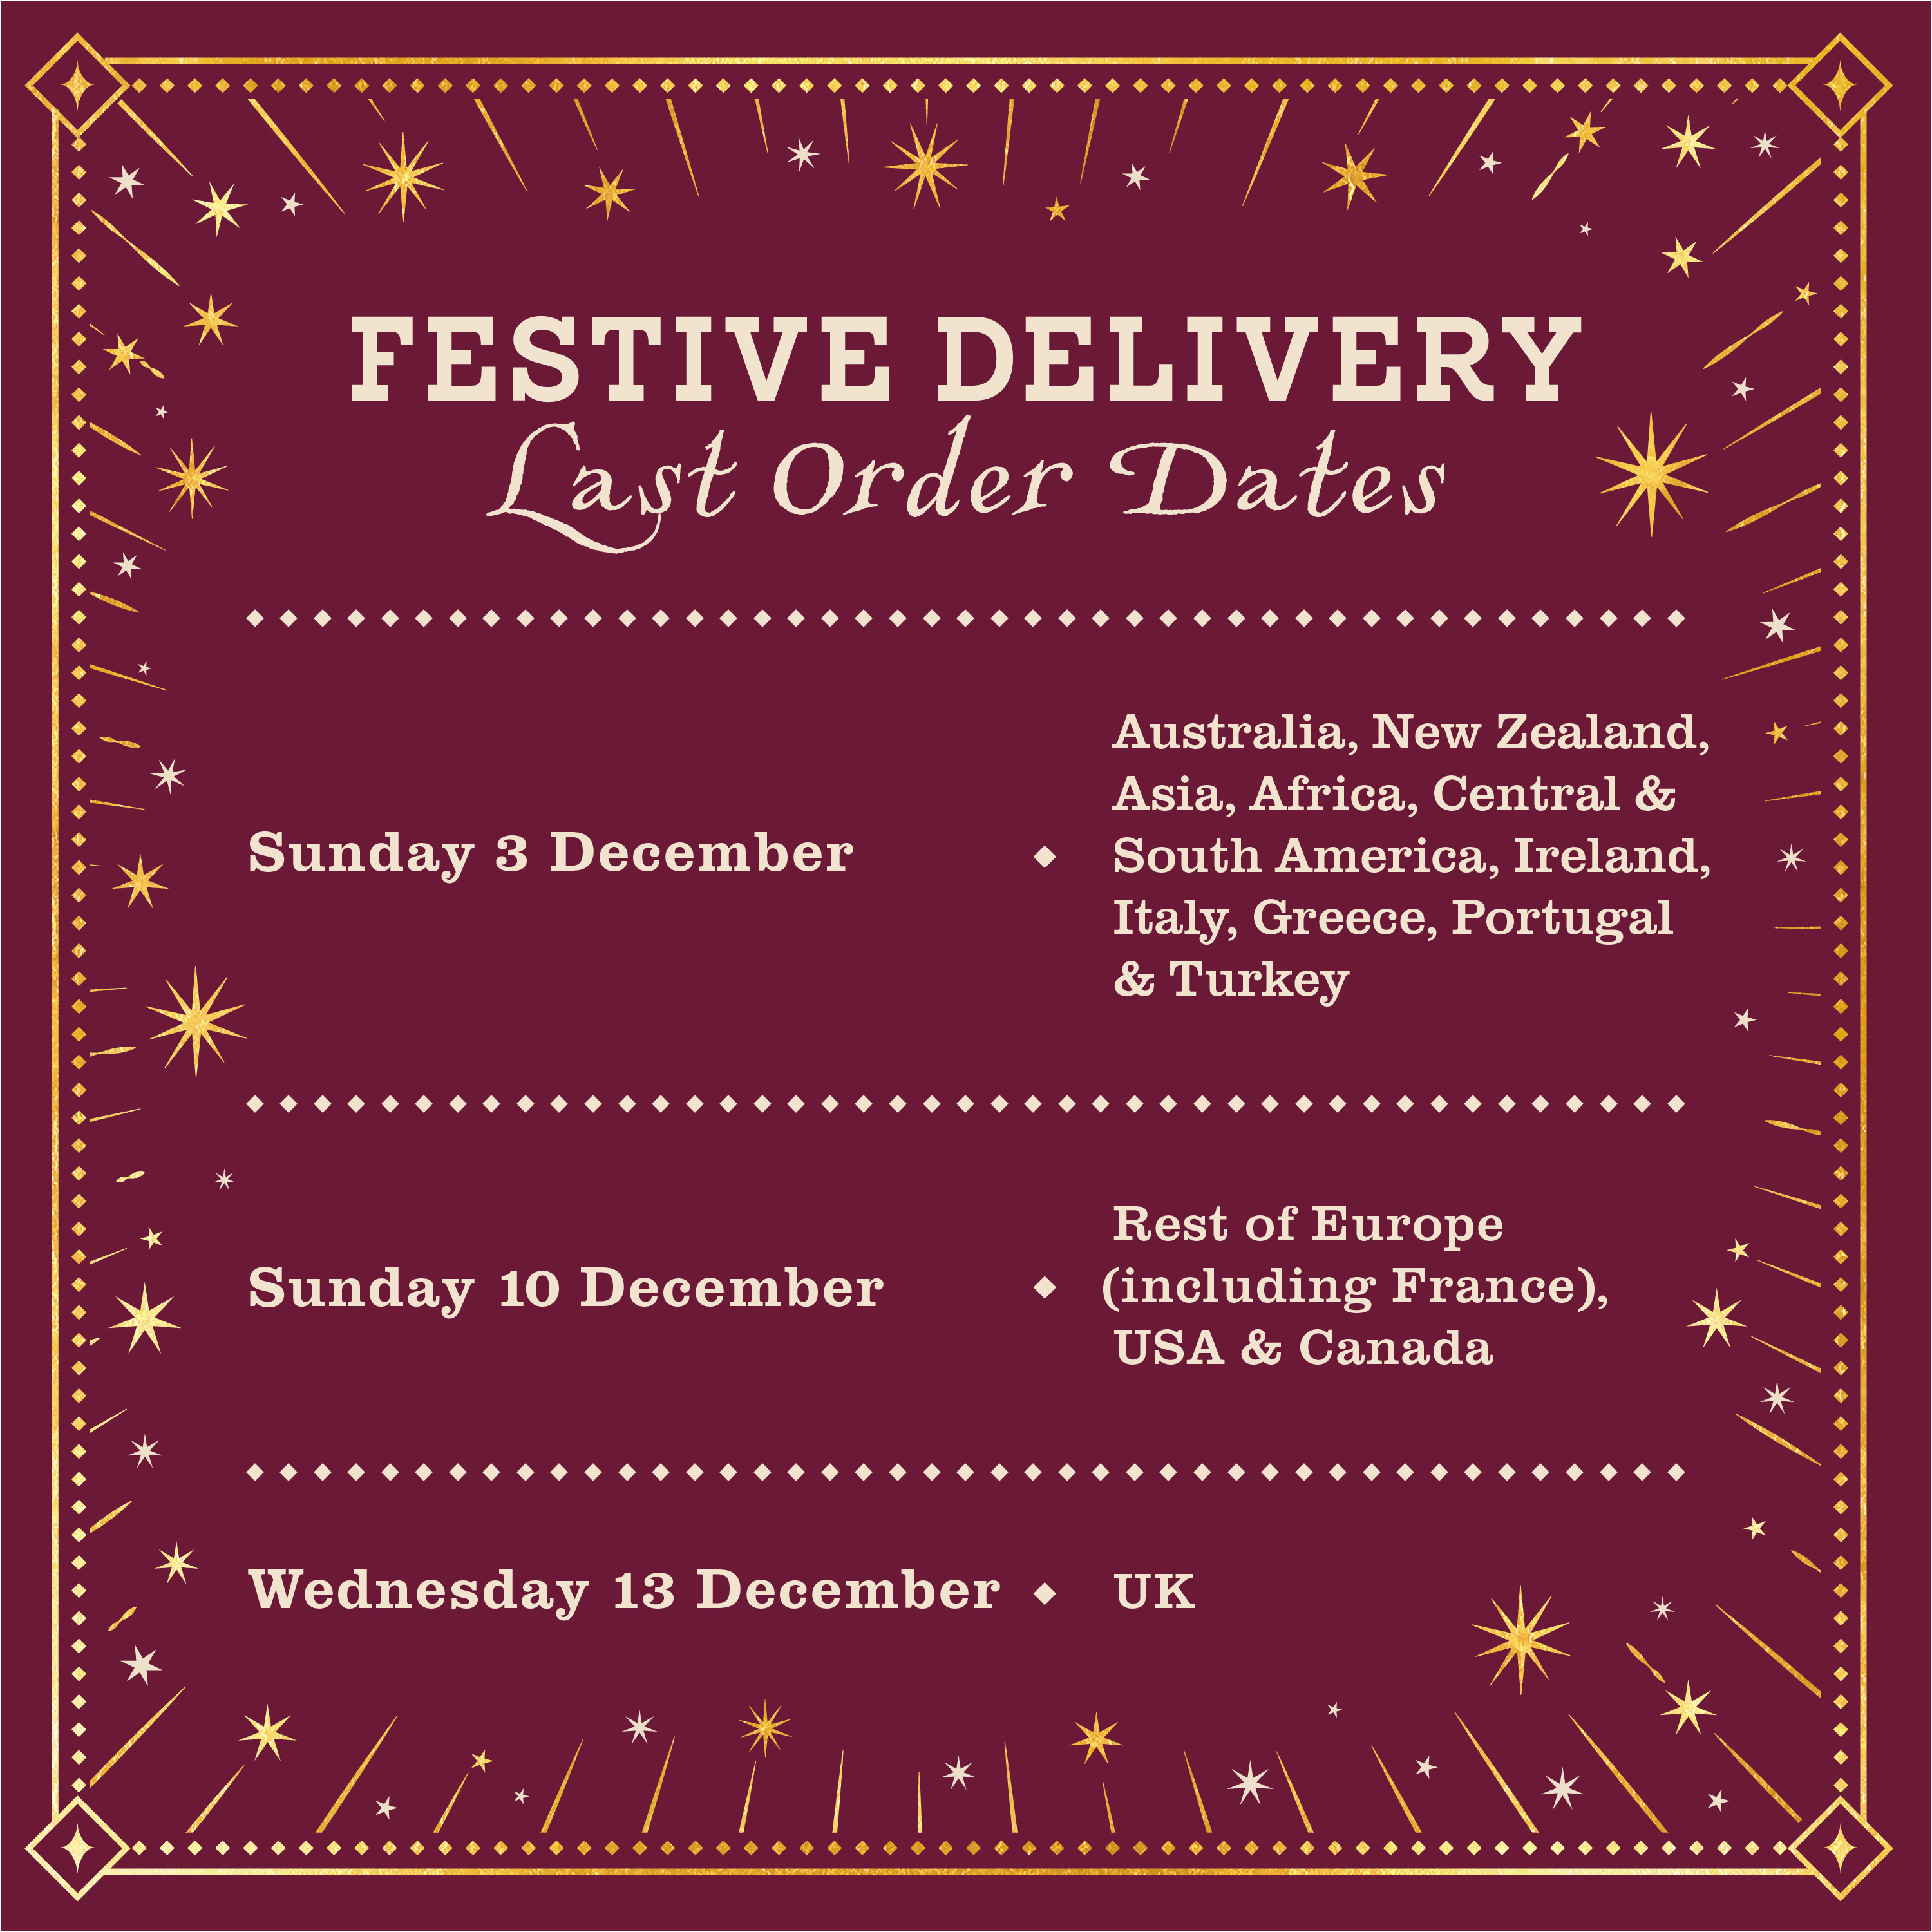 Festive Delivery Last Order Dates. Wednesday 13th December for UK. Sunday 10th December for USA, Canada and the rest of Europe including France. Sunday 3rd December for rest of world. 